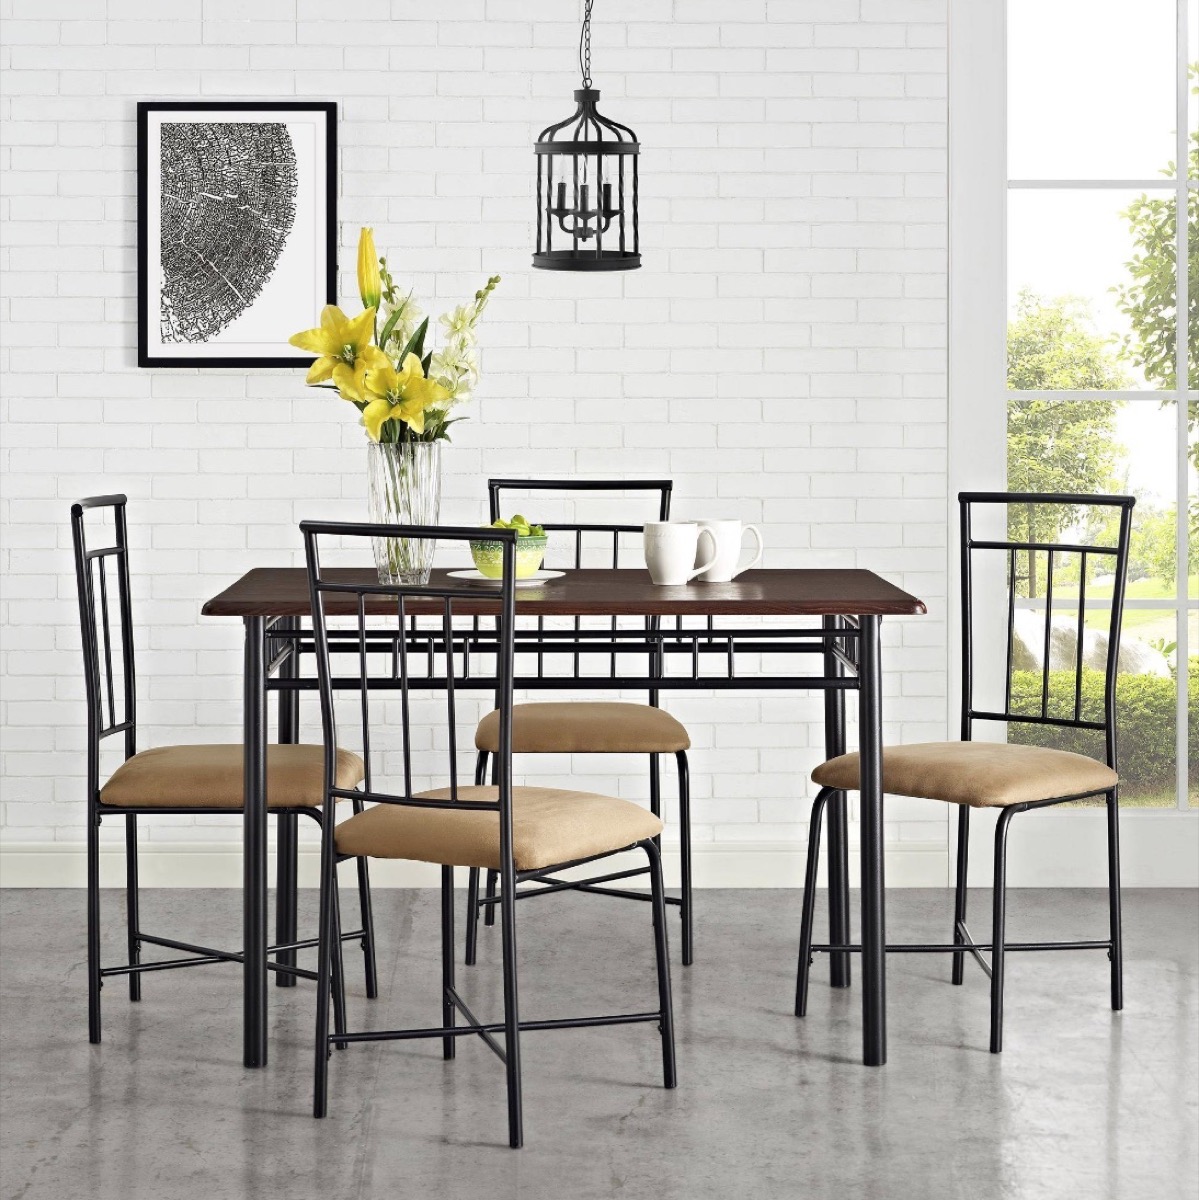 Dining Room Set from Walmart {Save Money on Furniture}